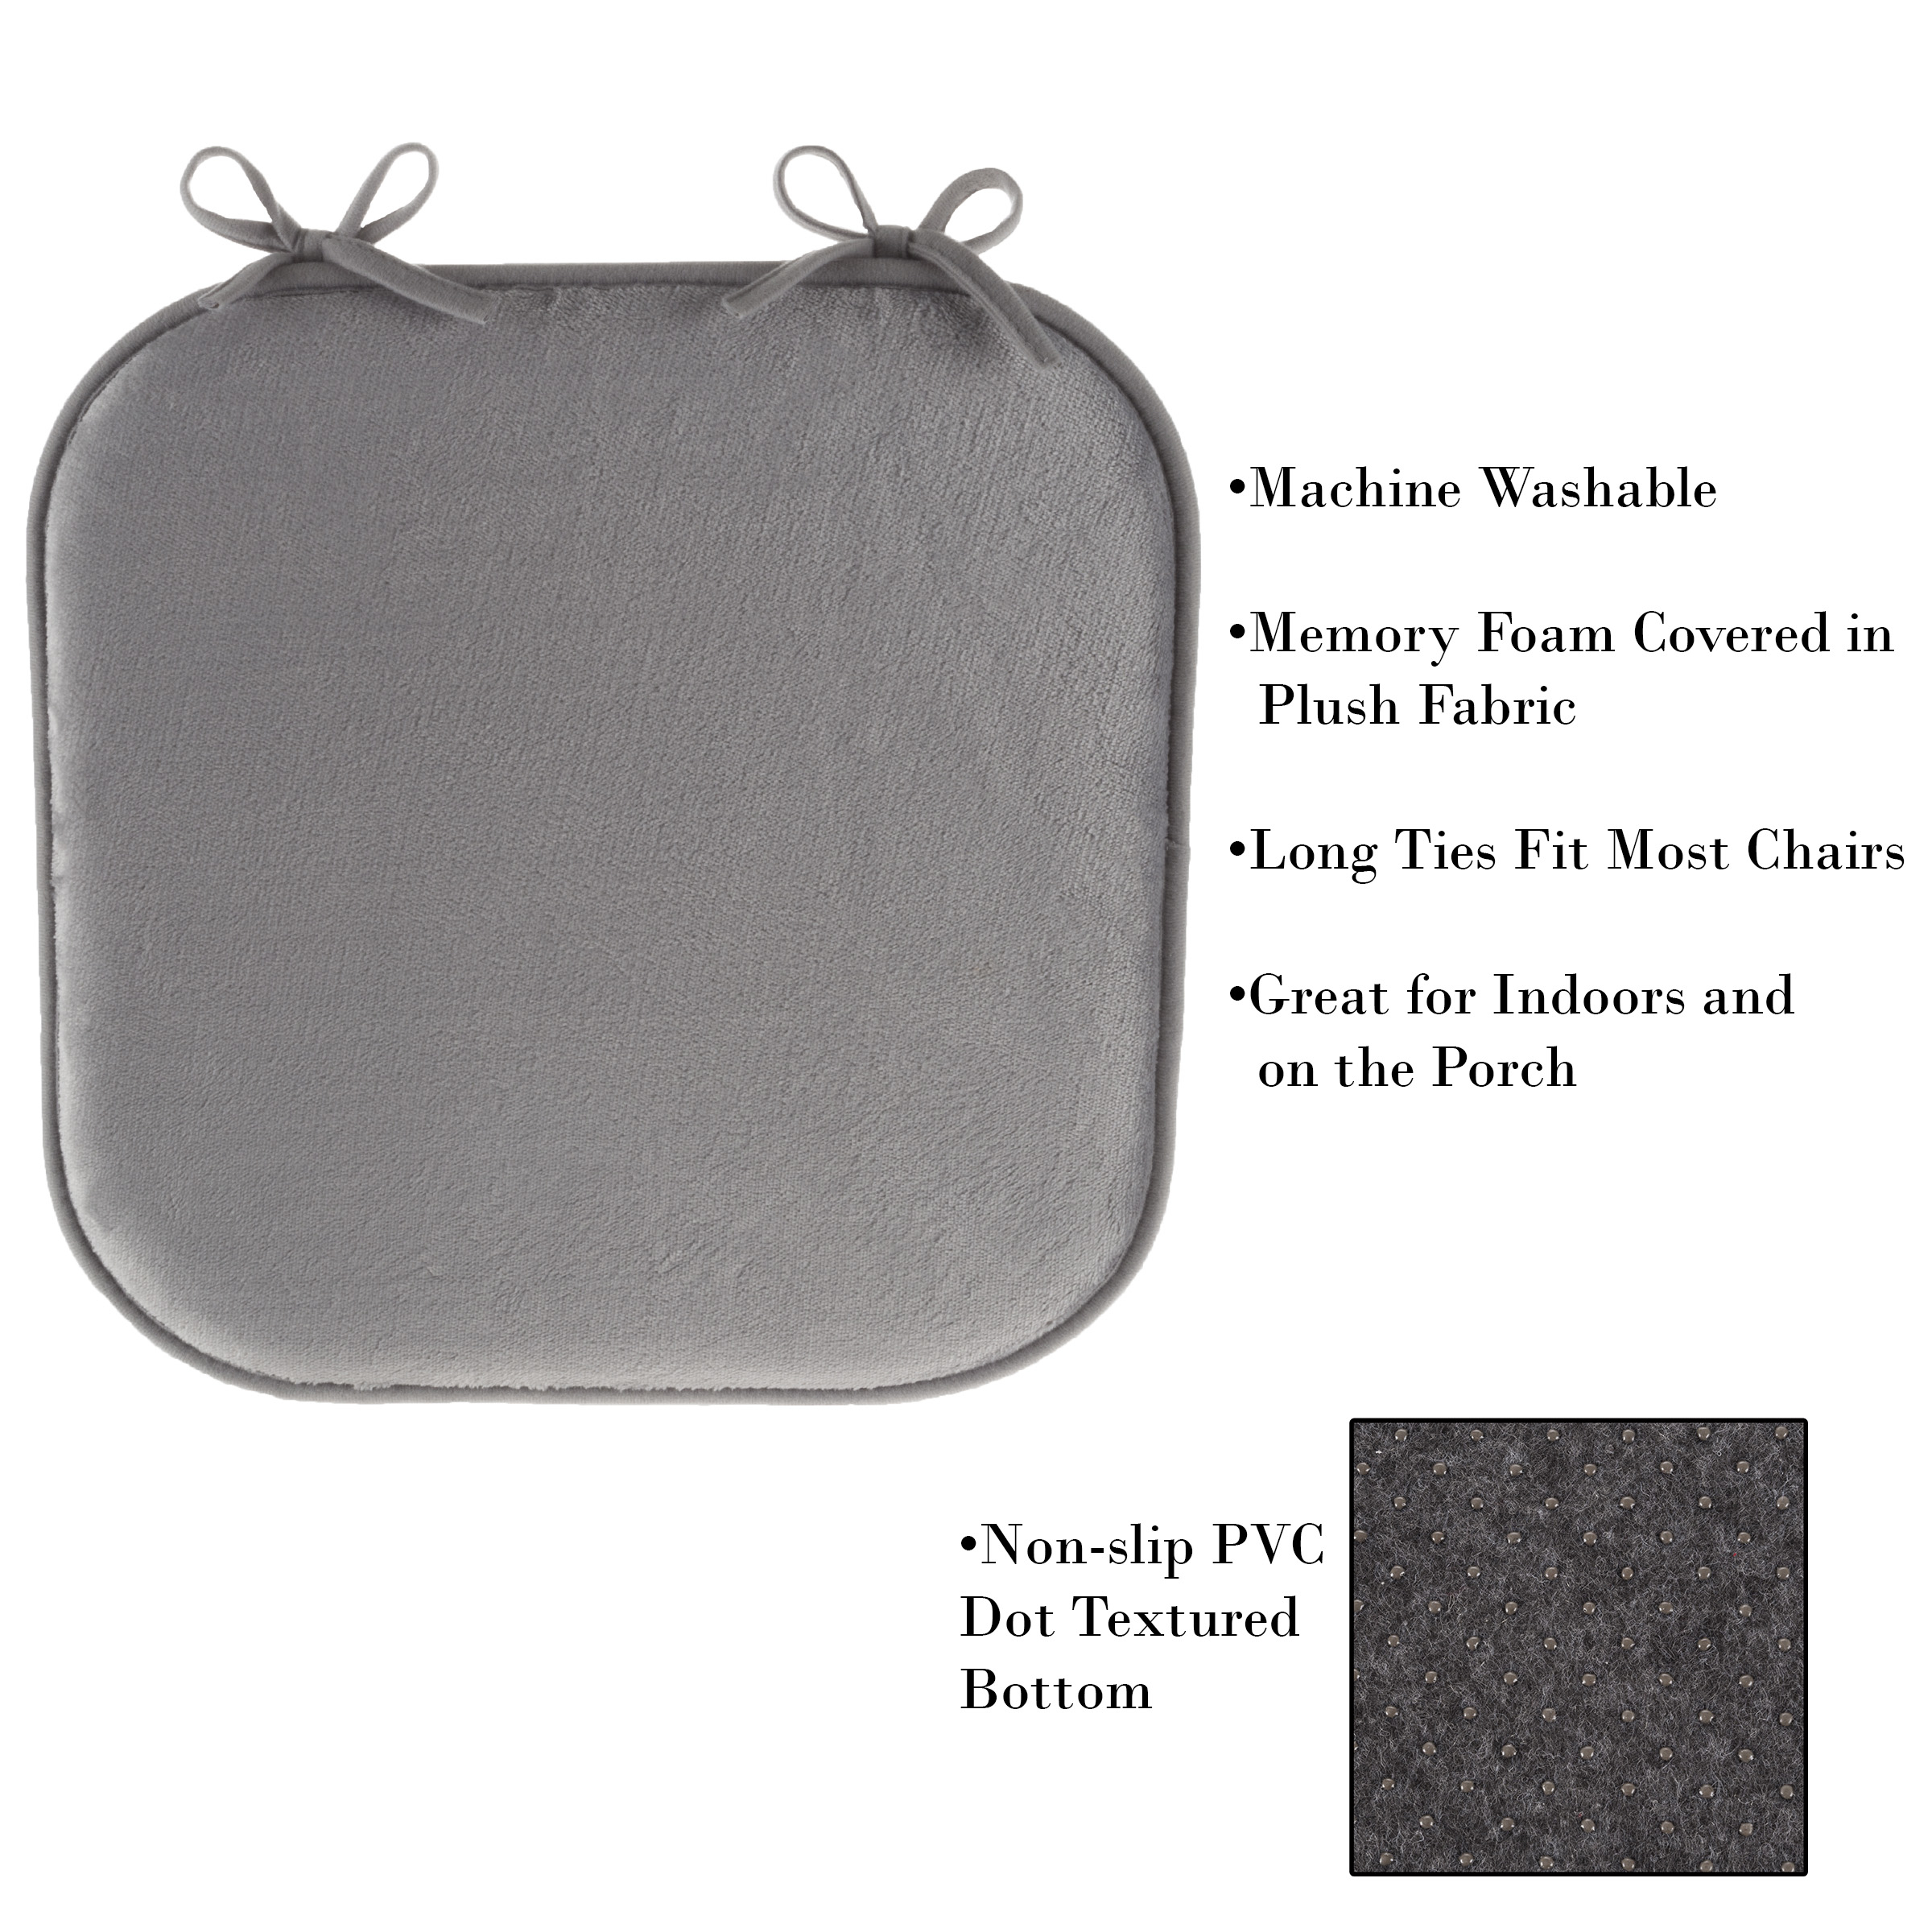 Memory Foam 16 X 16 Plush Chair Cover Cushion With Ties 1 Inch Thick Comfy Non Slip Gray